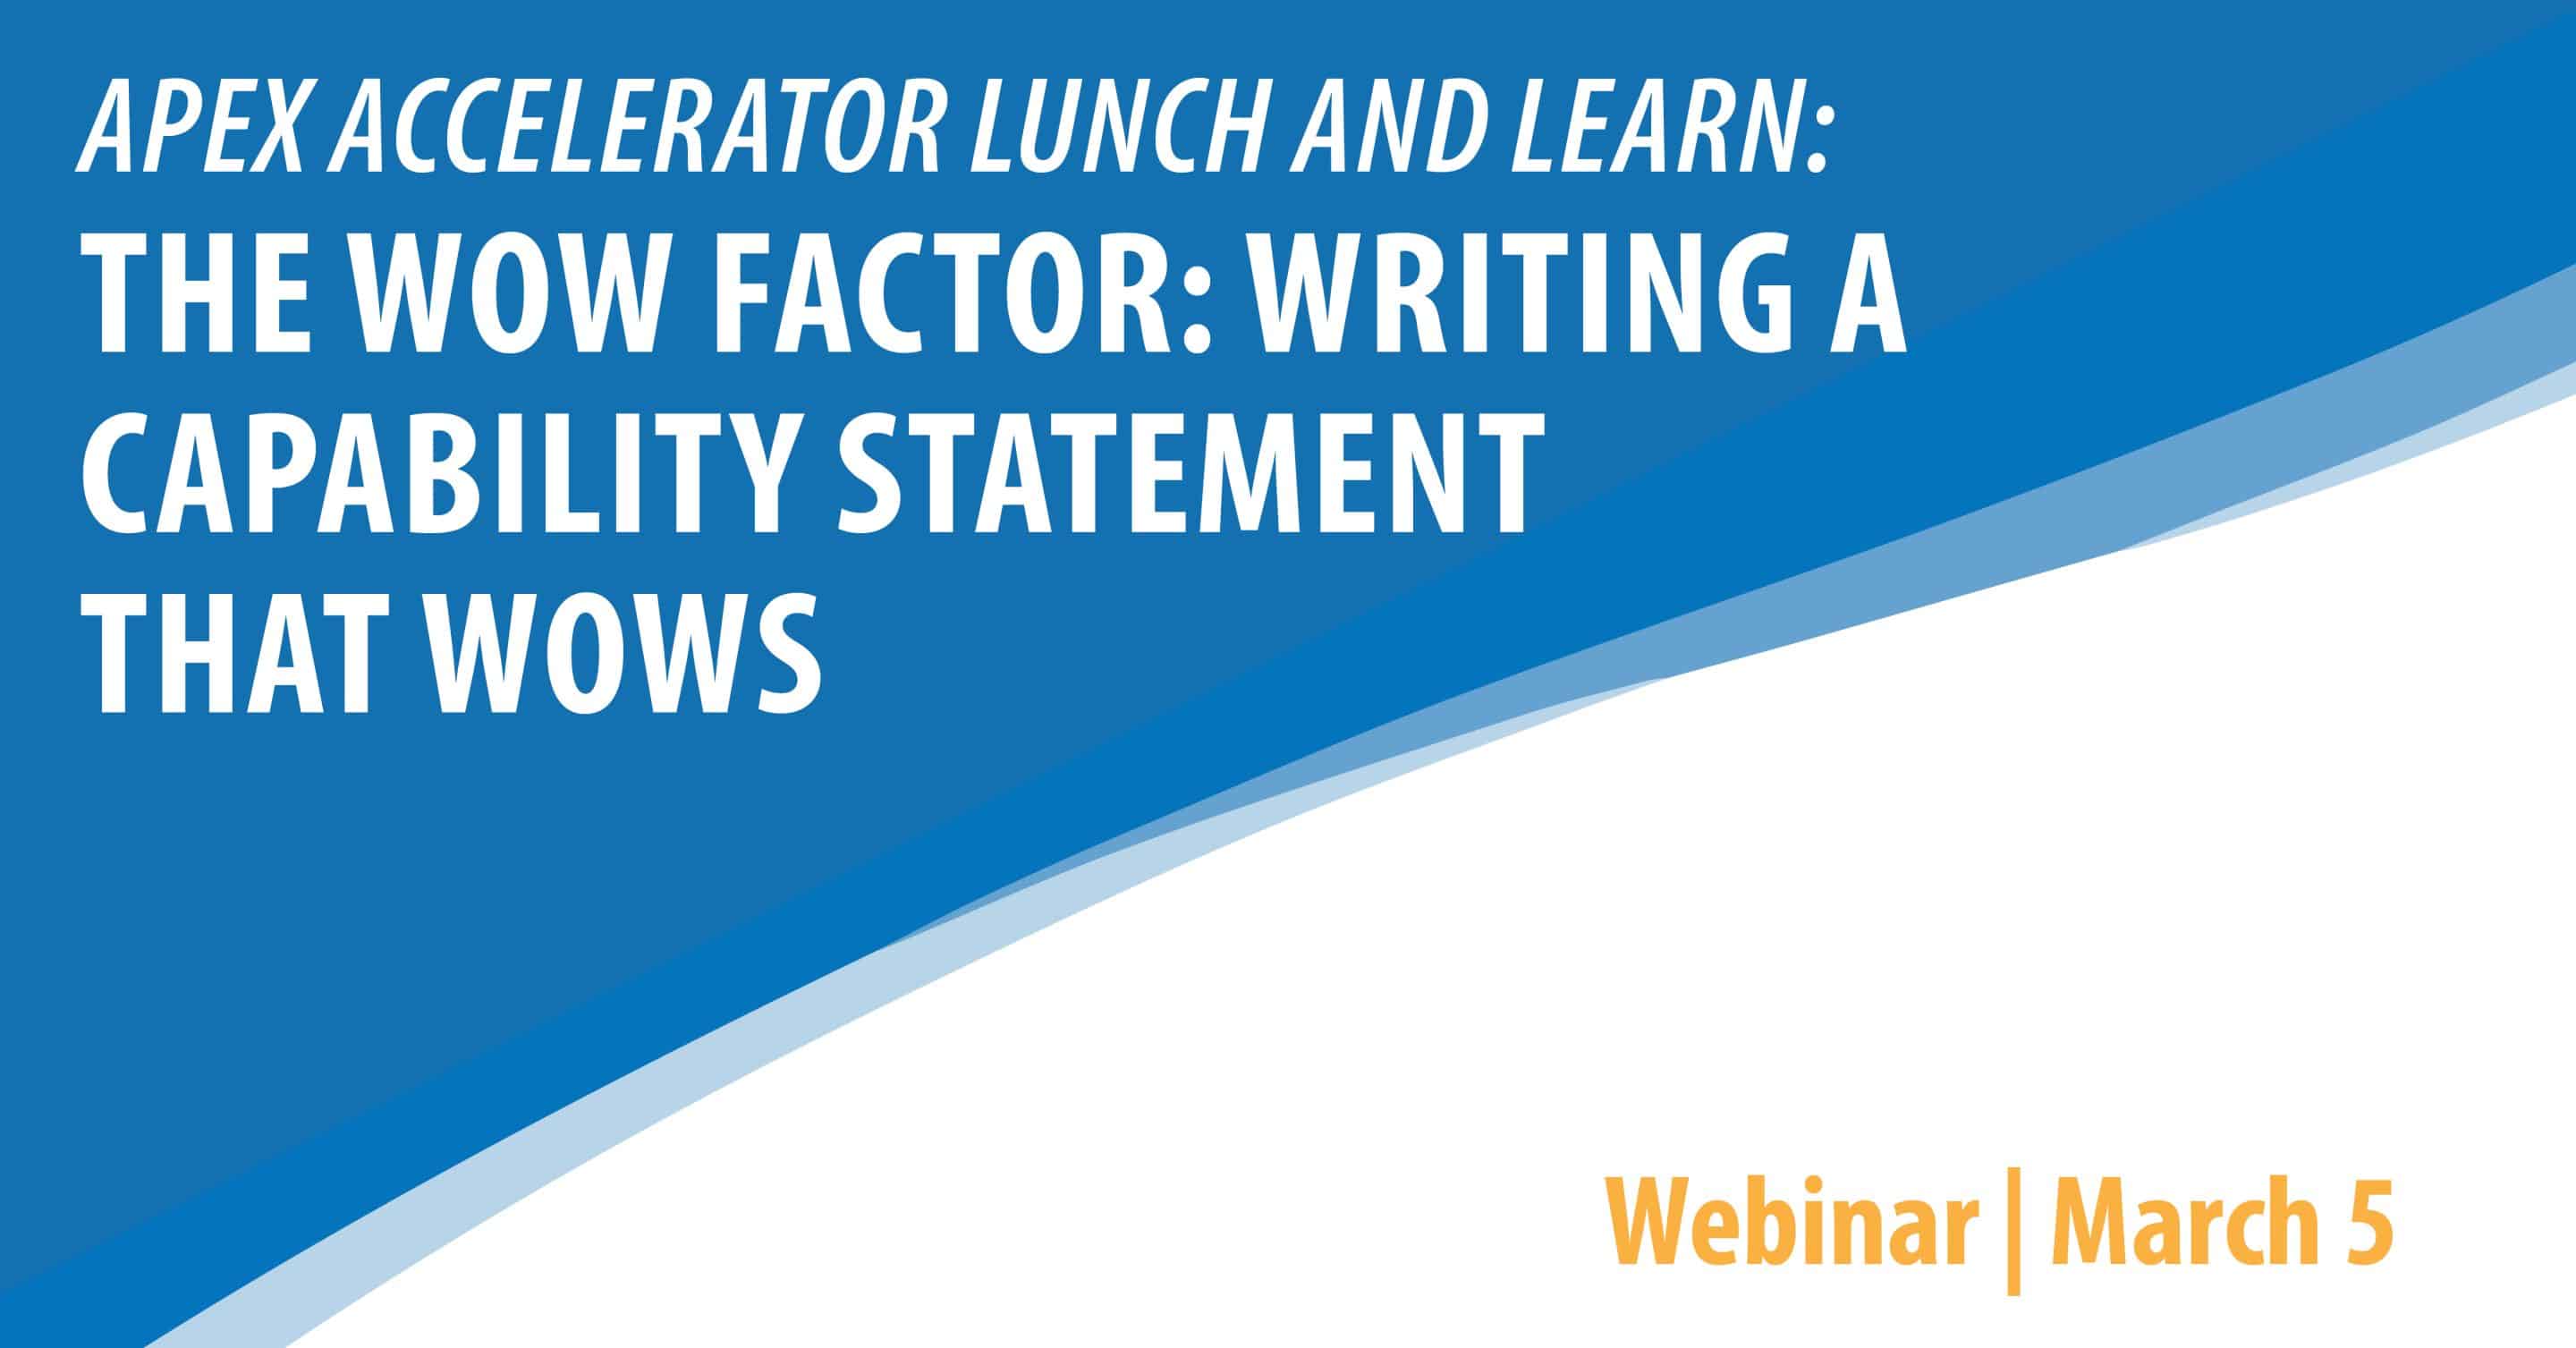 APEX Accelerator Lunch & Learn - The Wow Factor: Writing a Capability Statement that Wows